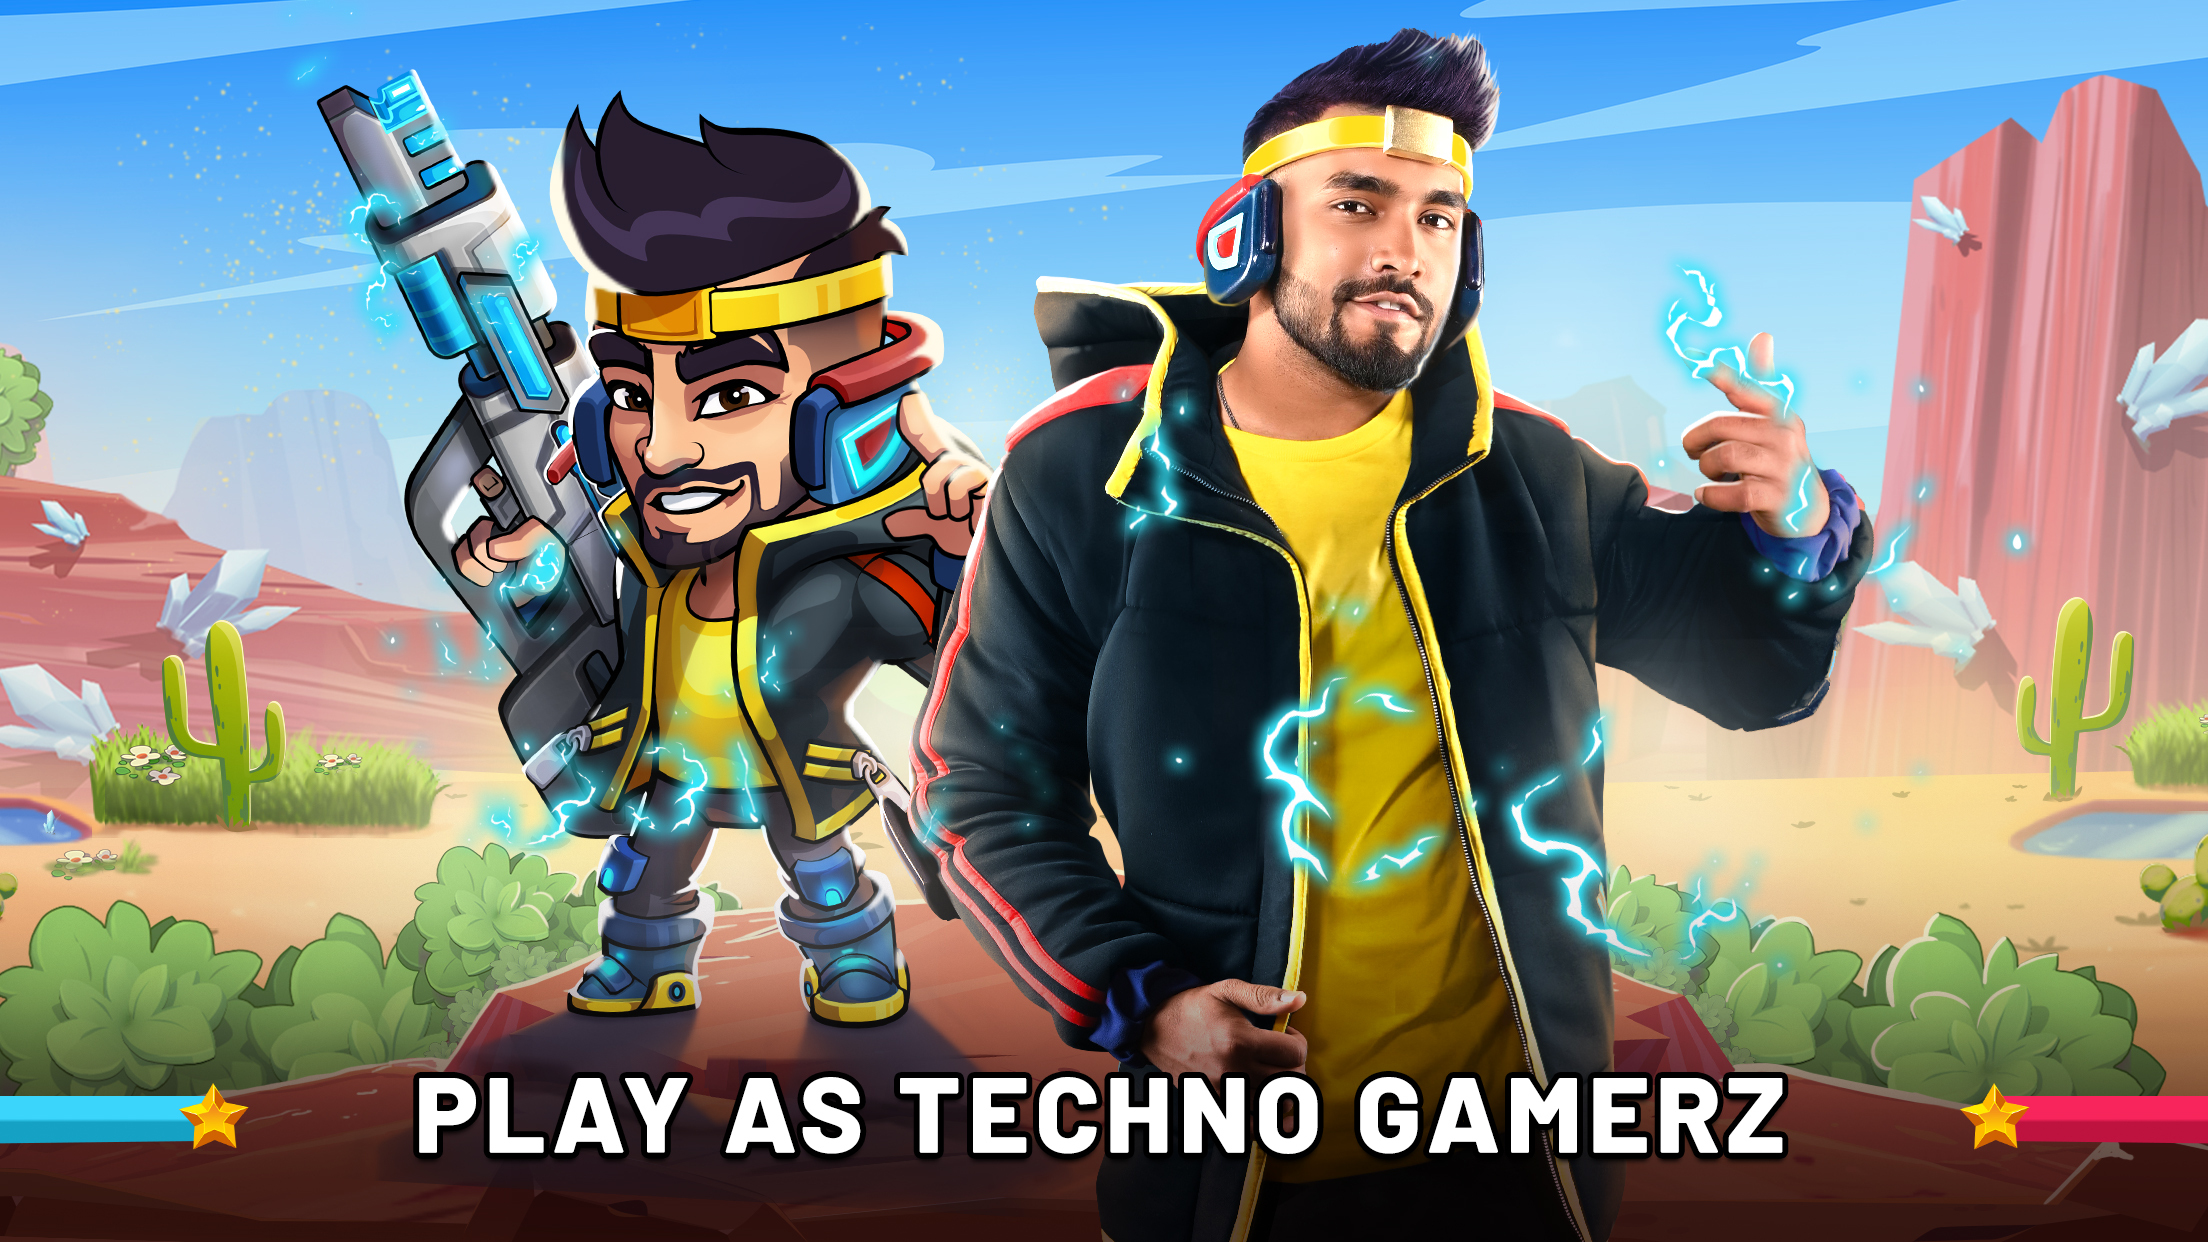 SuperGaming Releases New Shooter Battle Stars With India’s Leading Gaming YouTuber Techno Gamerz as Playable Hero